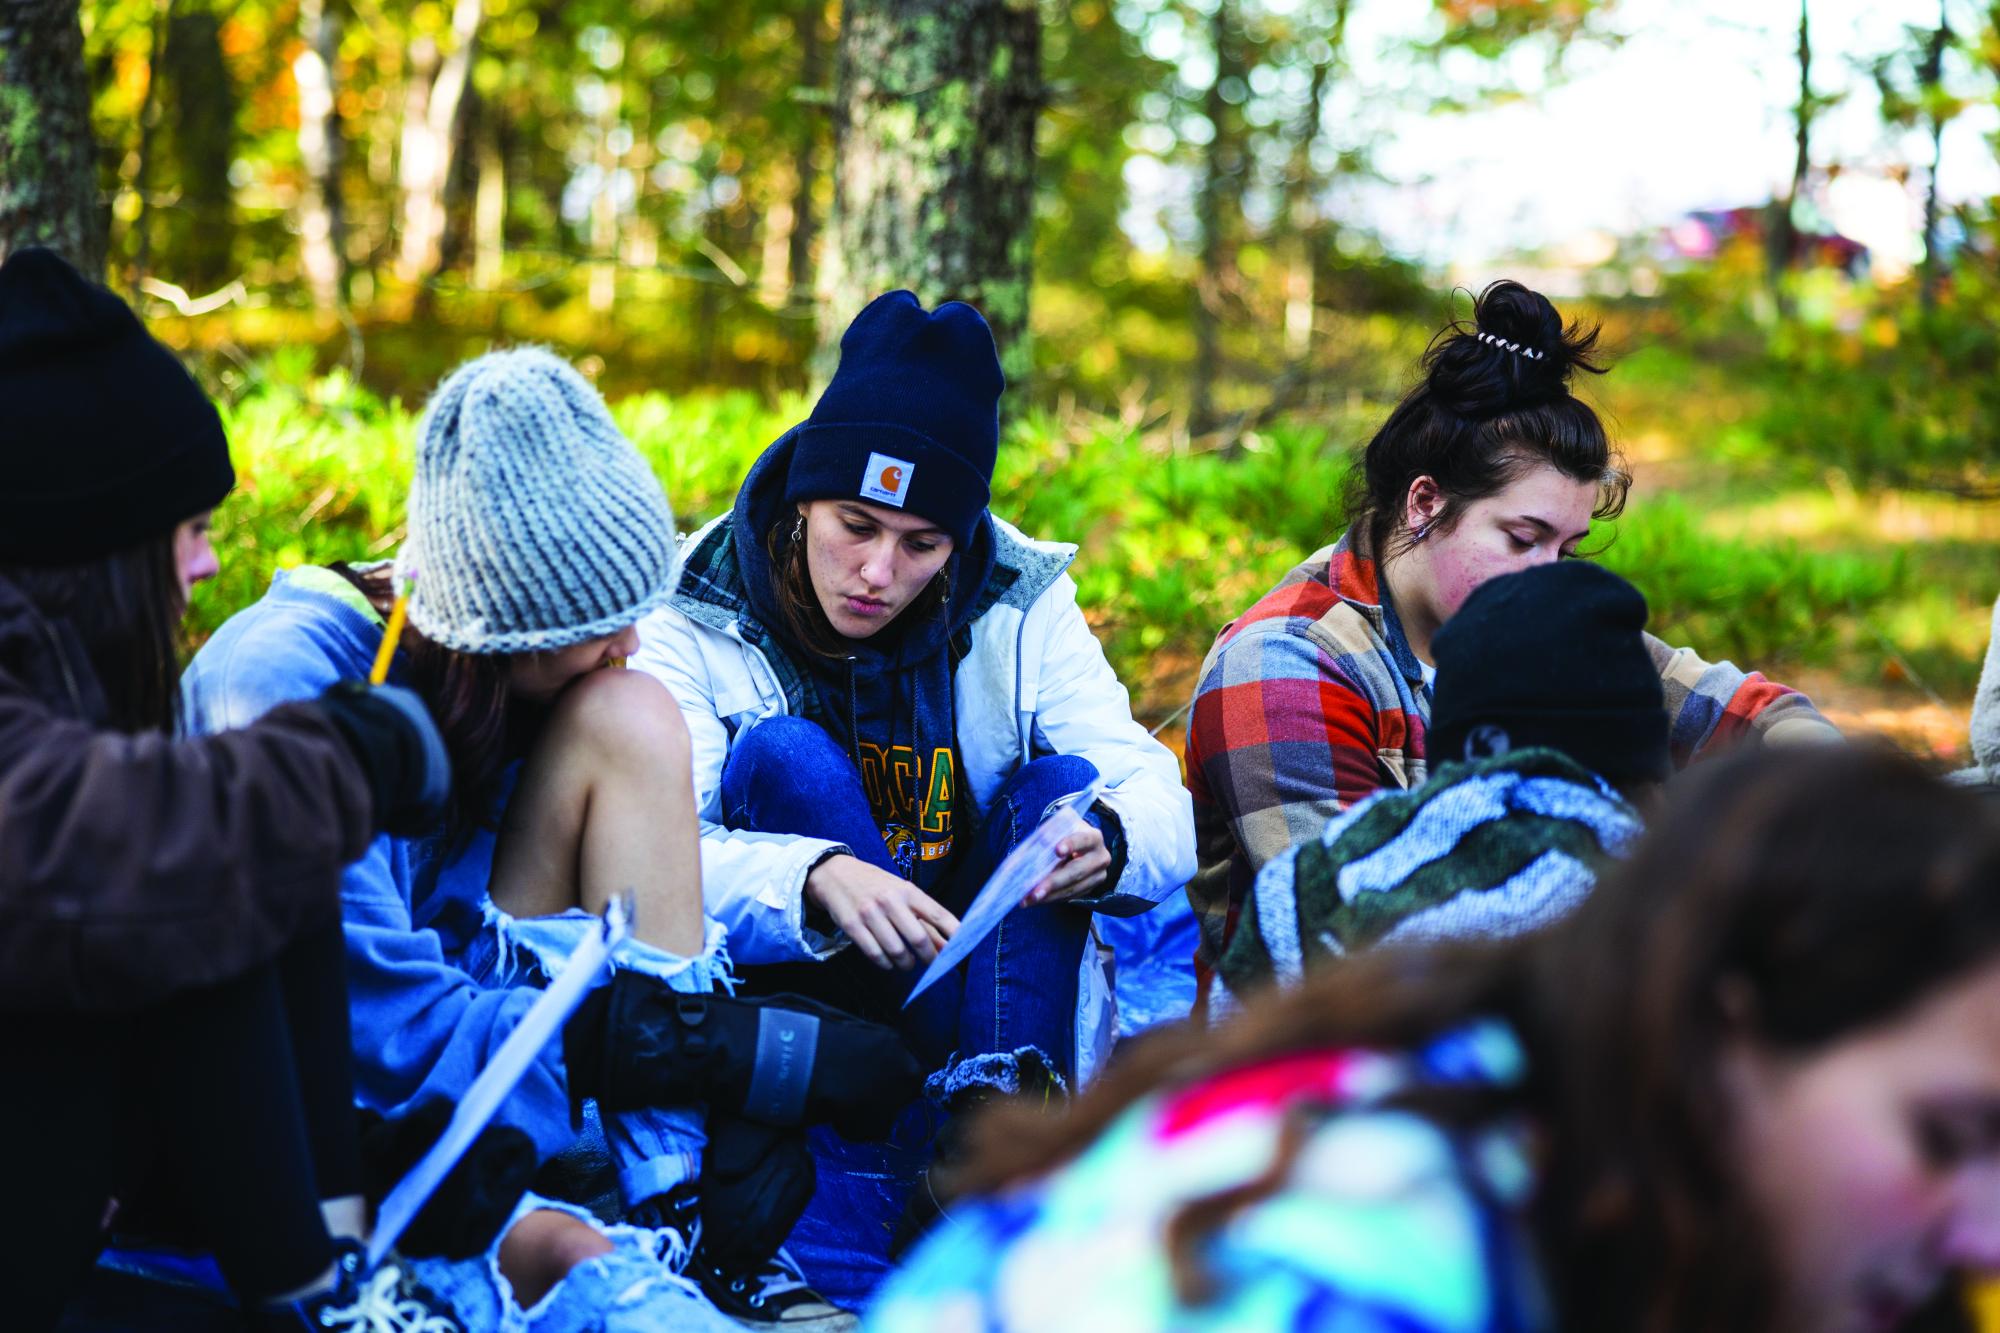 Students learning in a wooded environment